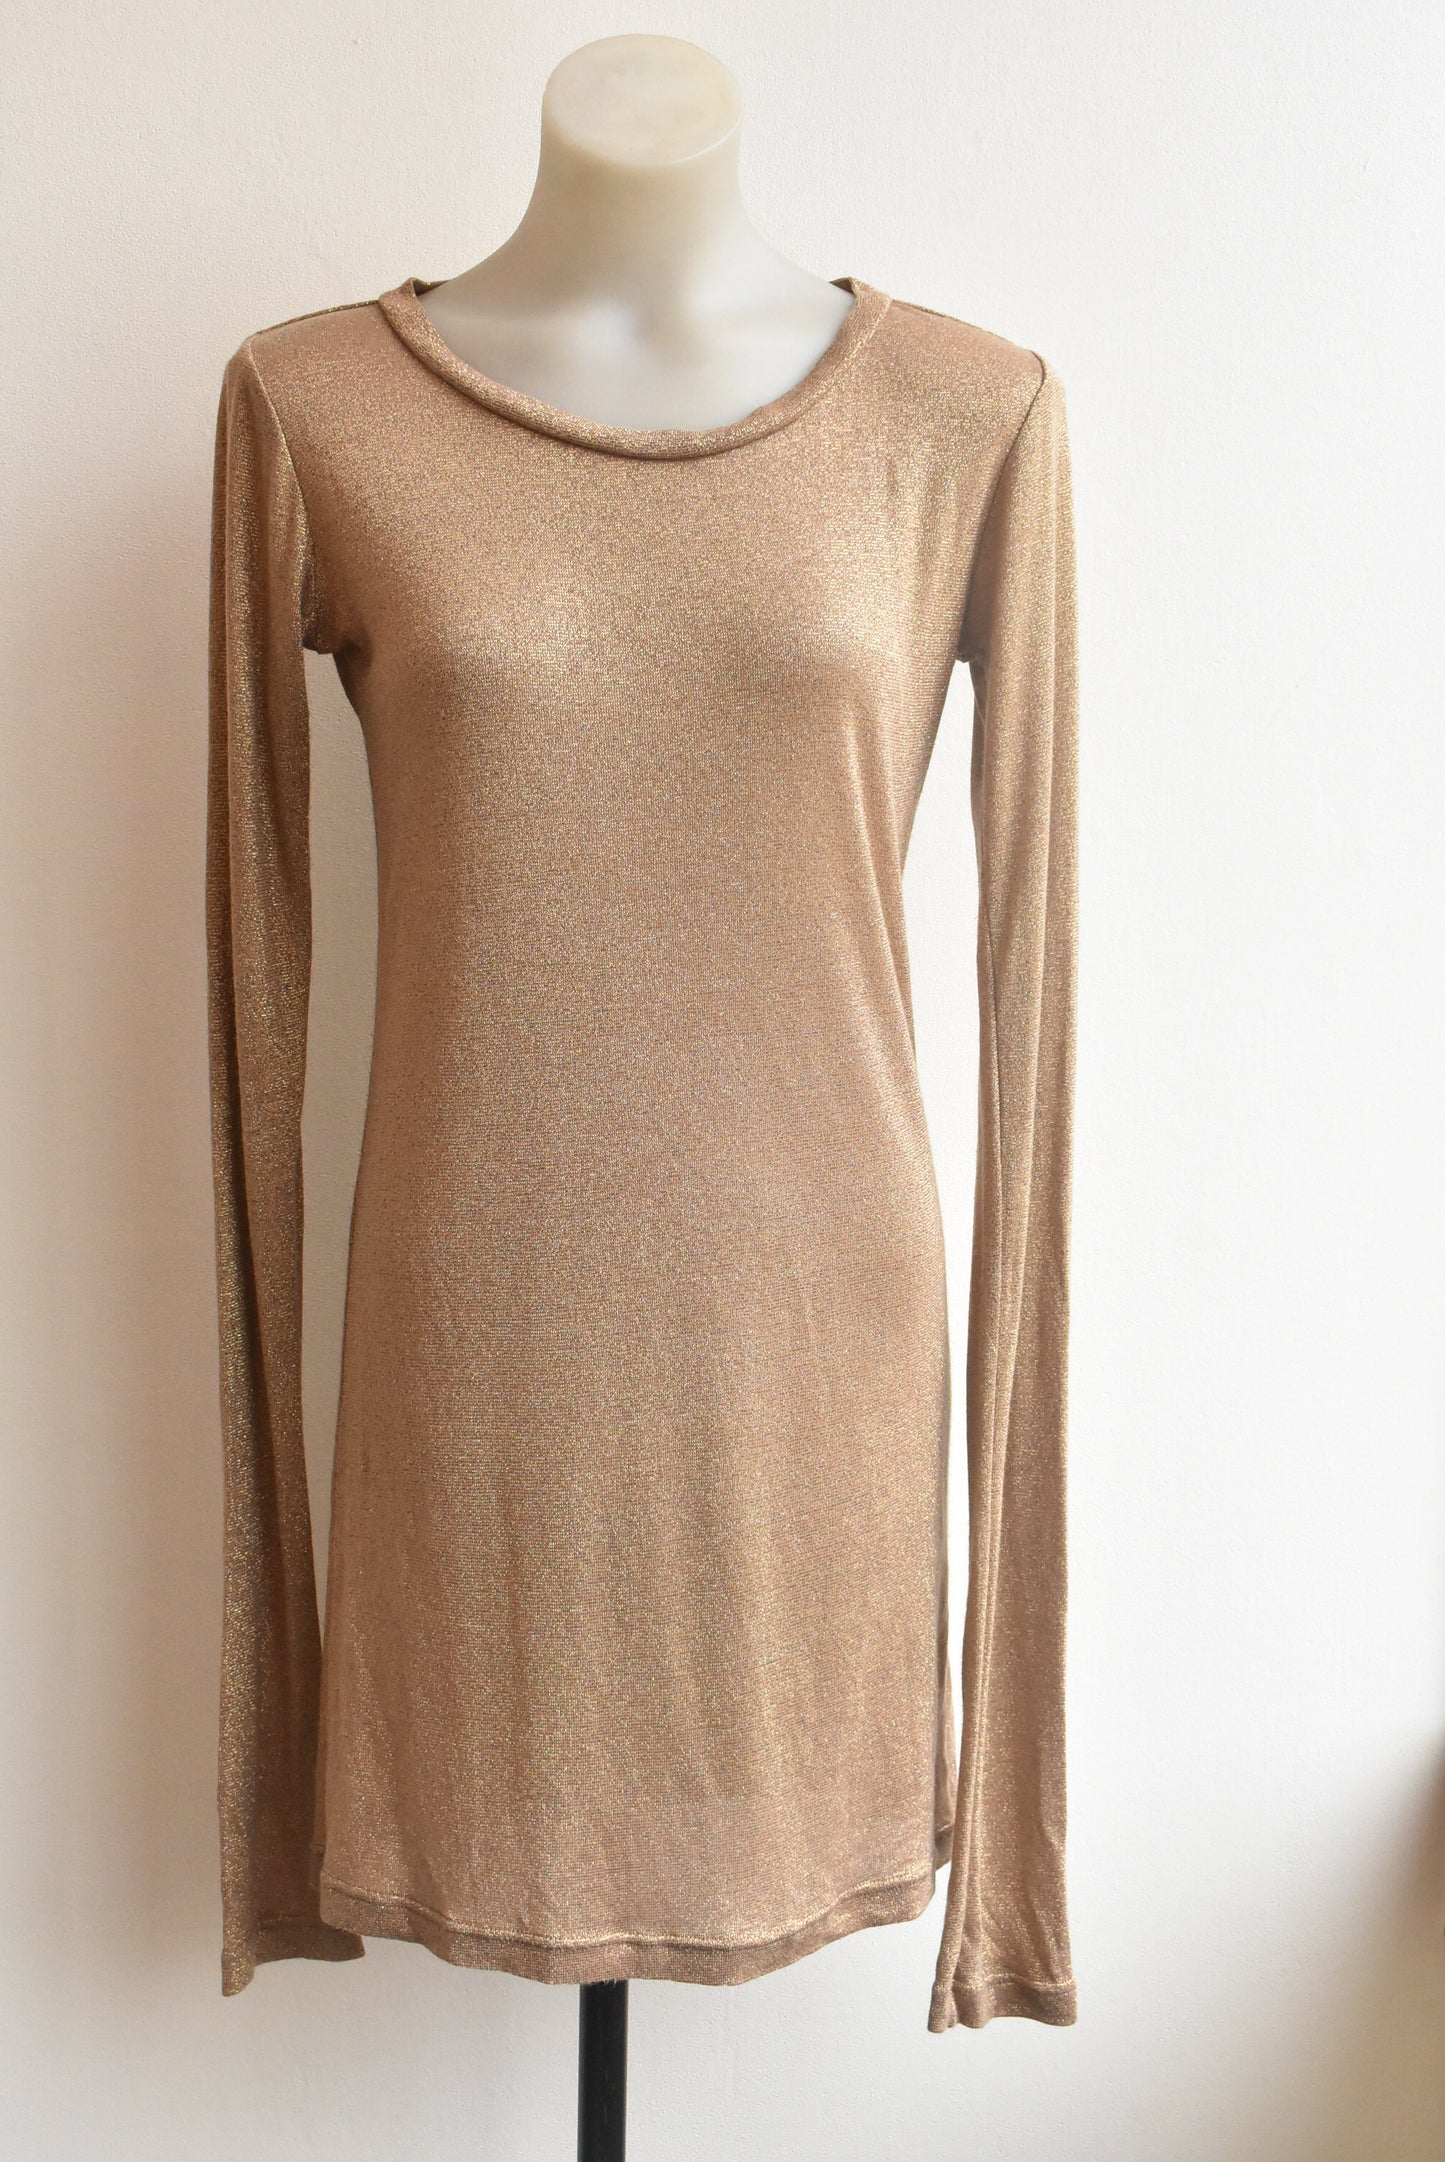 Thrive long gold sparkly tunic, size M